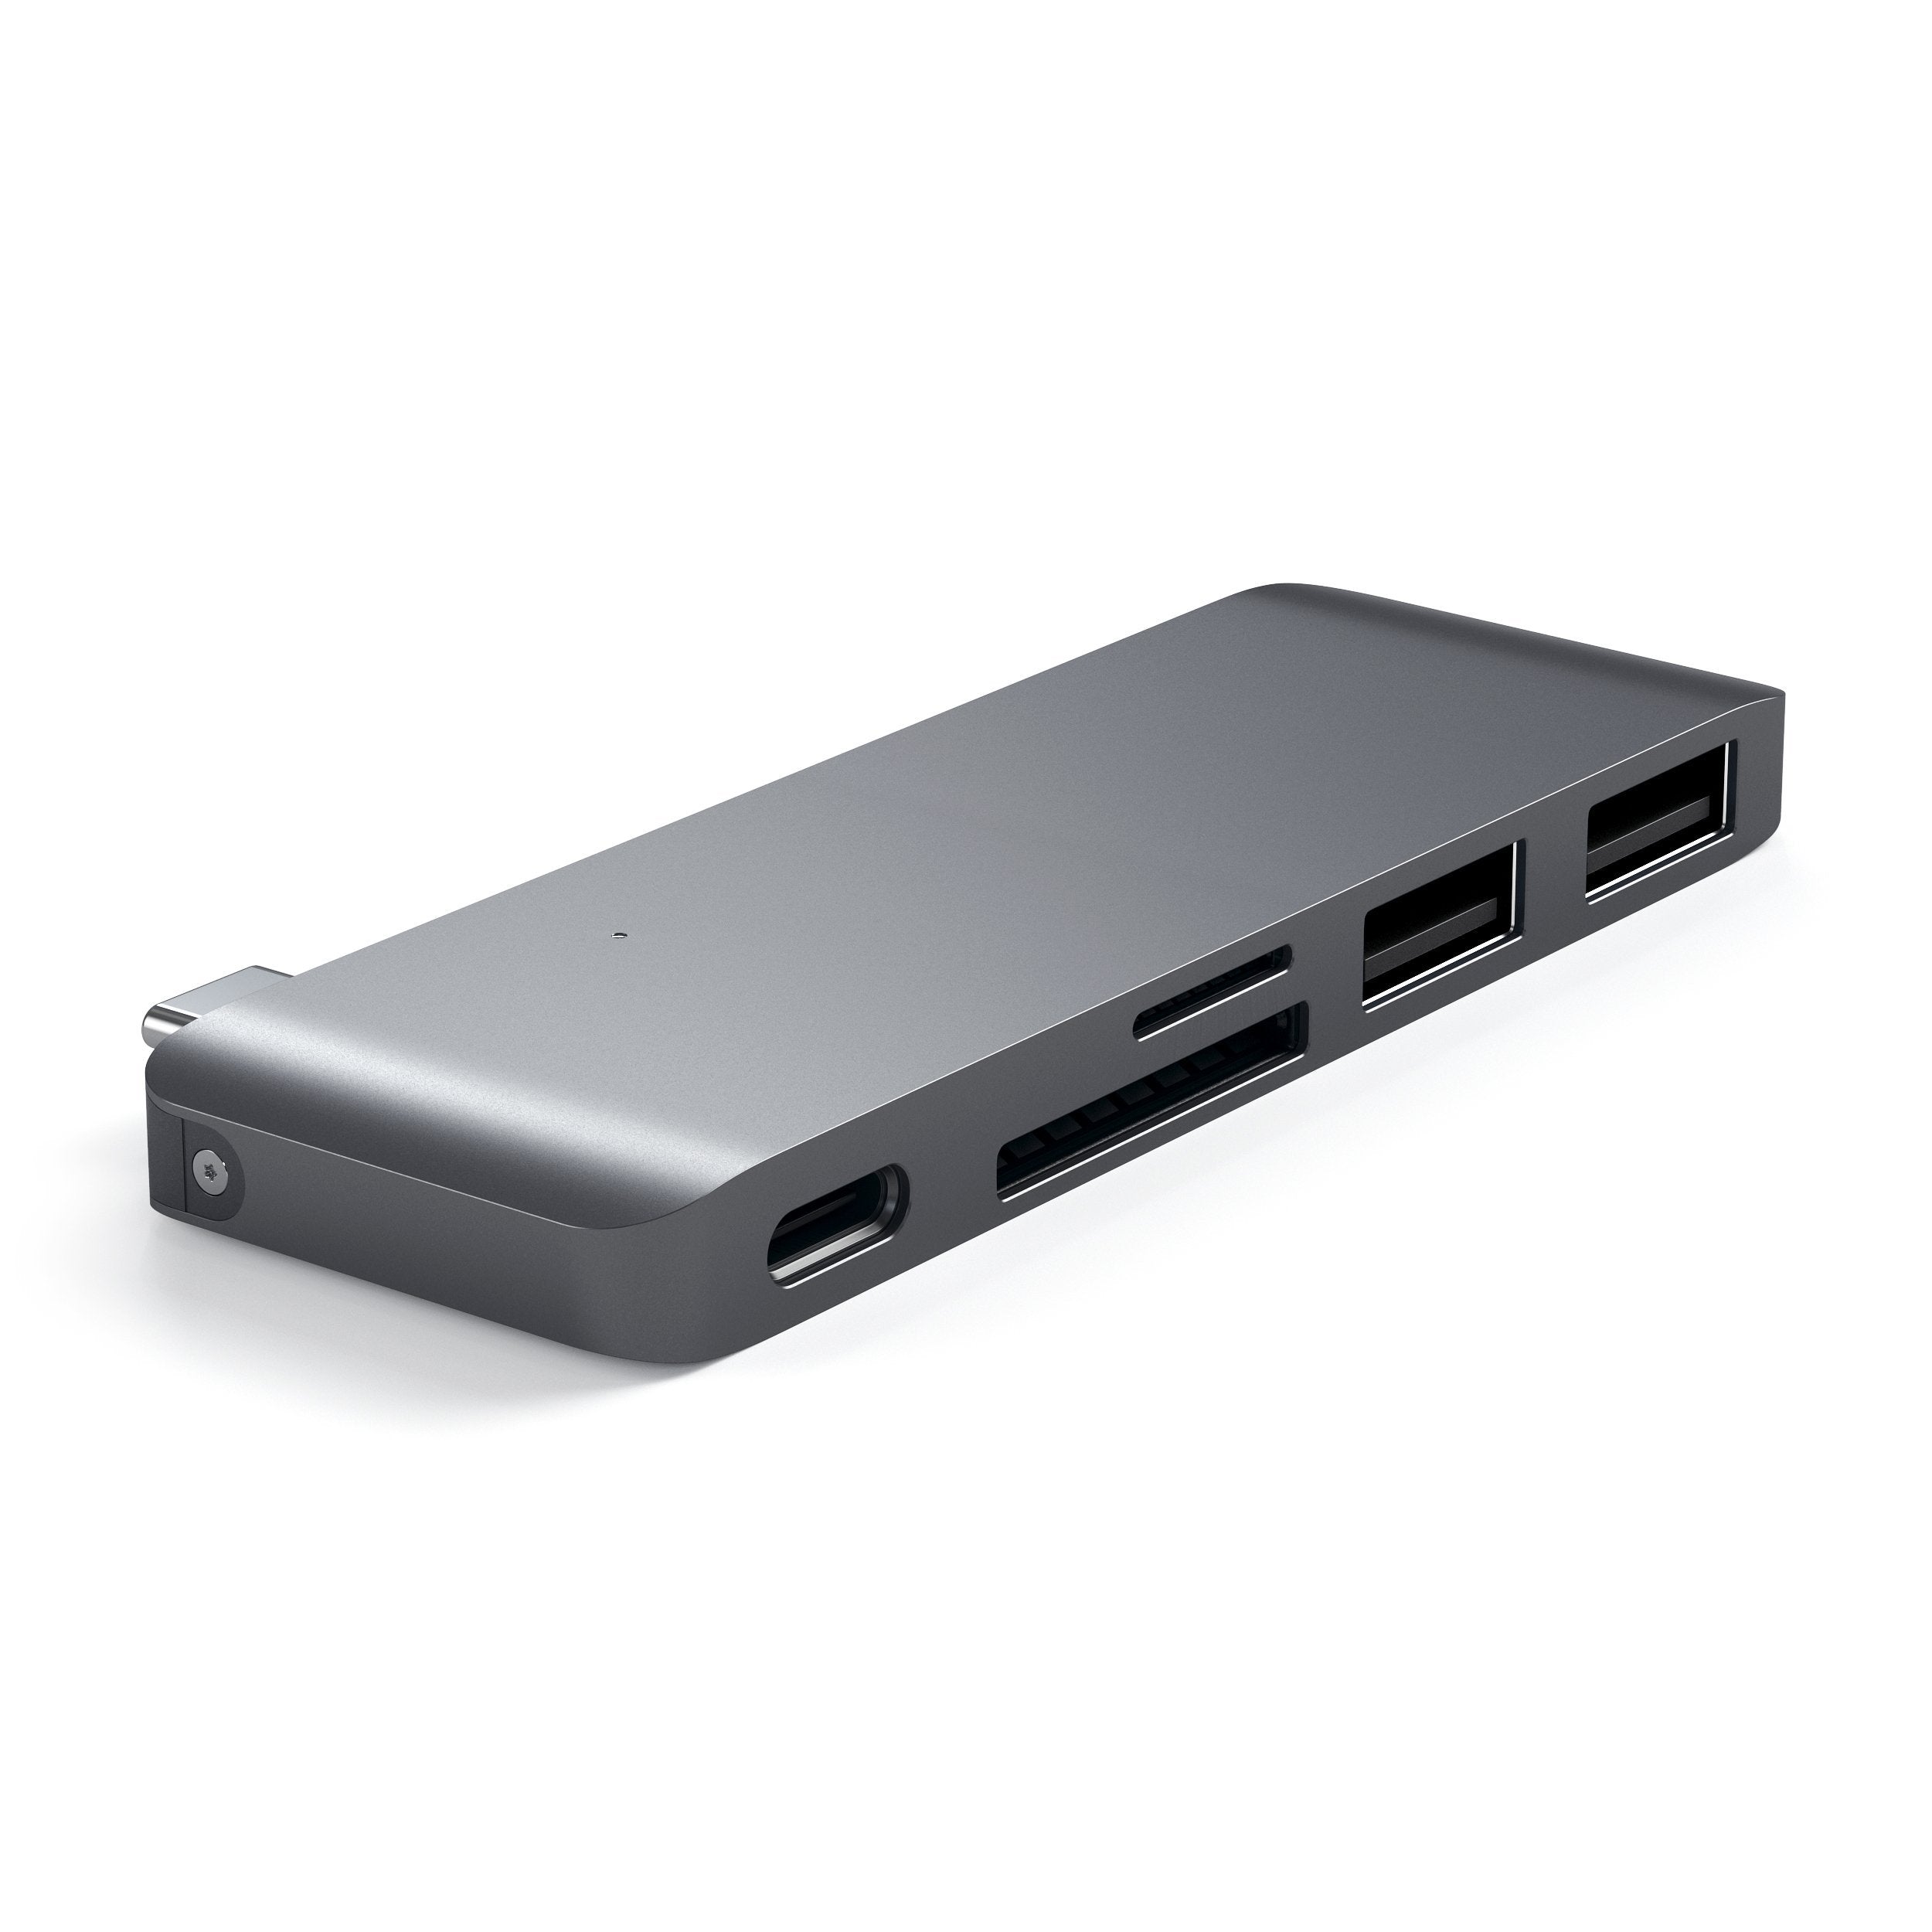 Satechi Launches Type-C Pro Hub for 2016 MacBook Pro With Ports